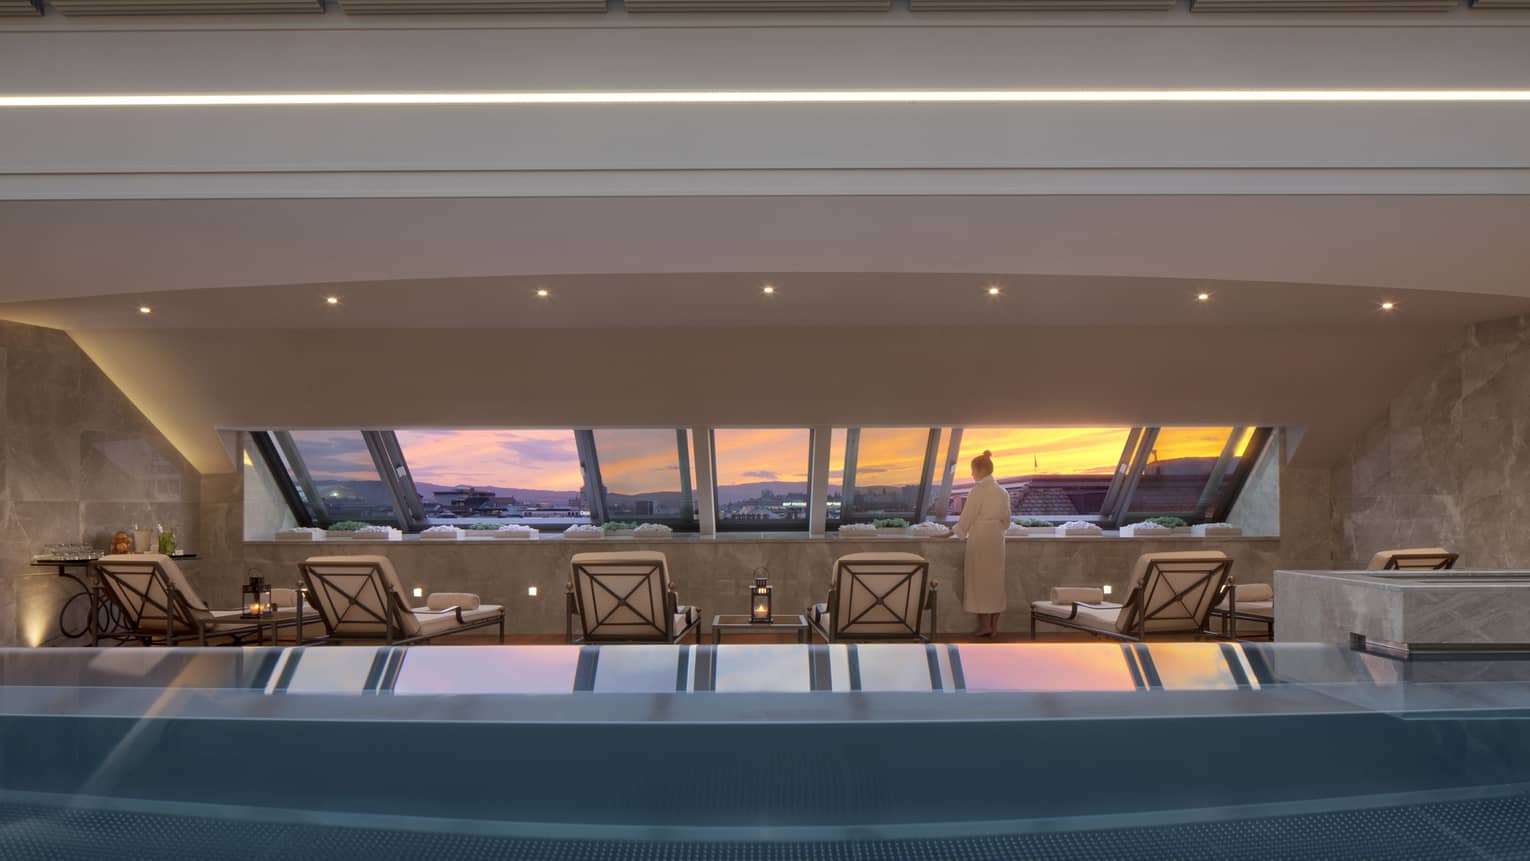 Woman in robe stands on deck beside blue indoor swimming pool, lounge chairs, looking at sunset through window